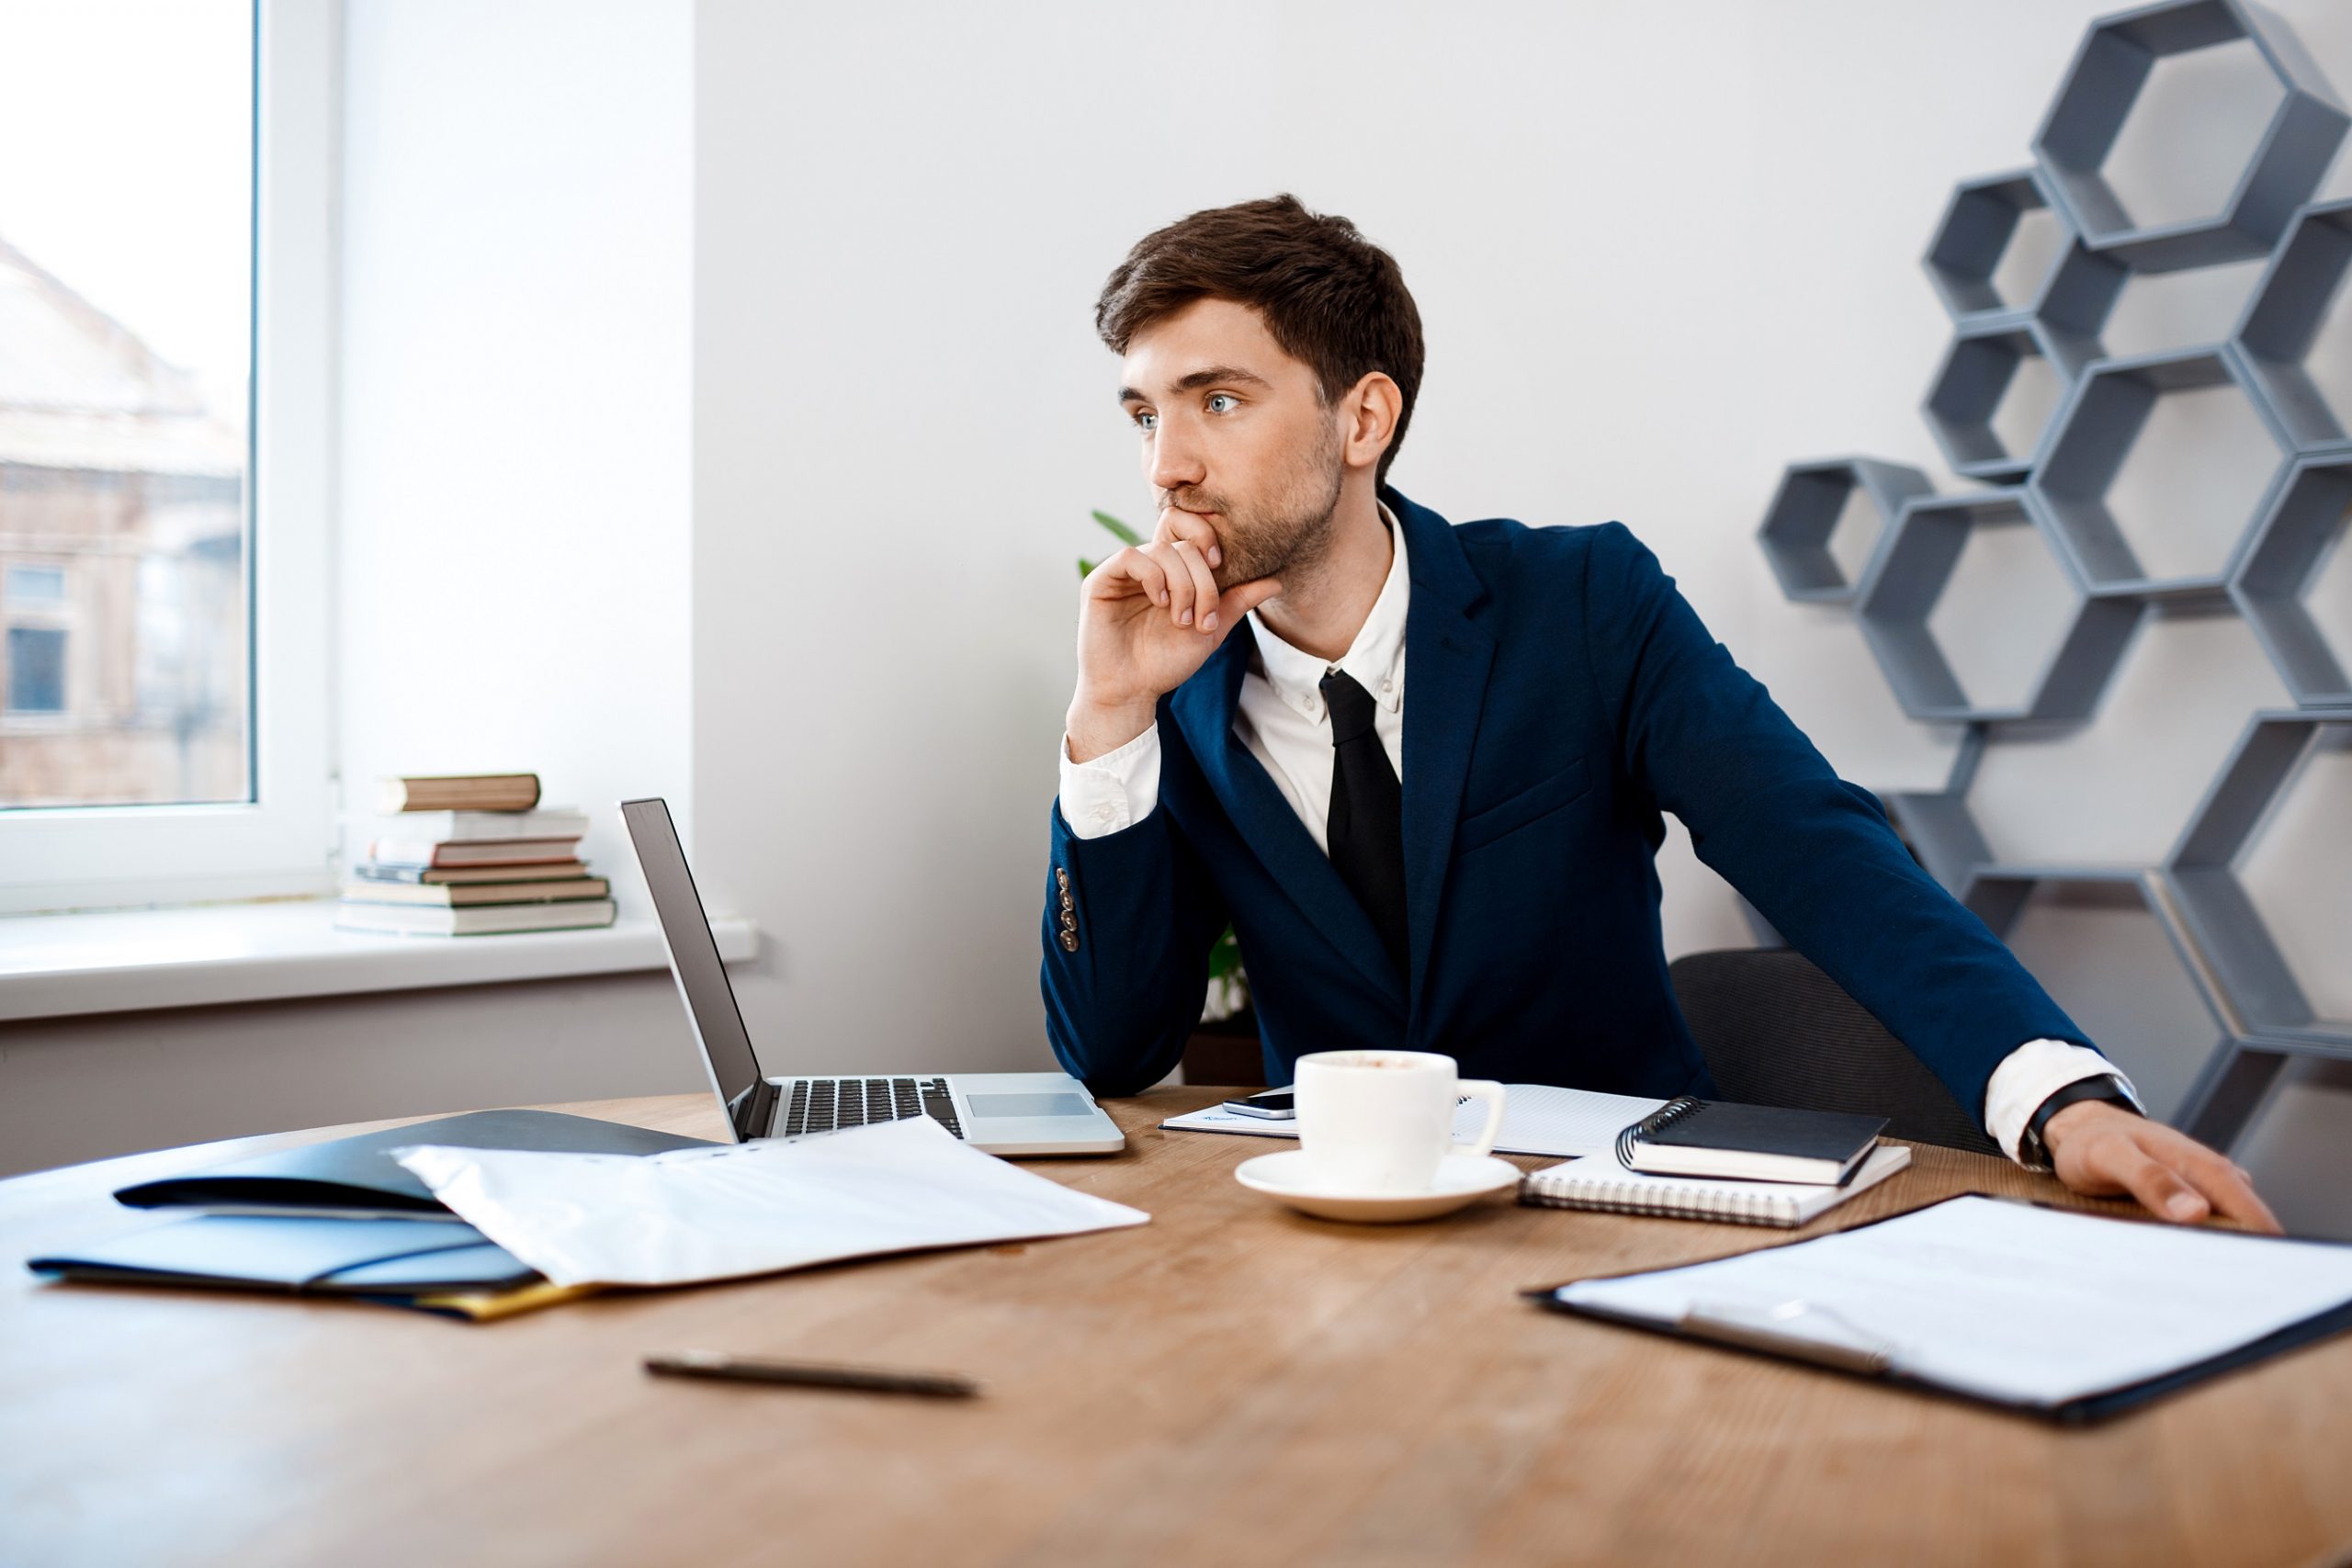 Young successful businessman in suit sitting at workplace, thinking, office background.